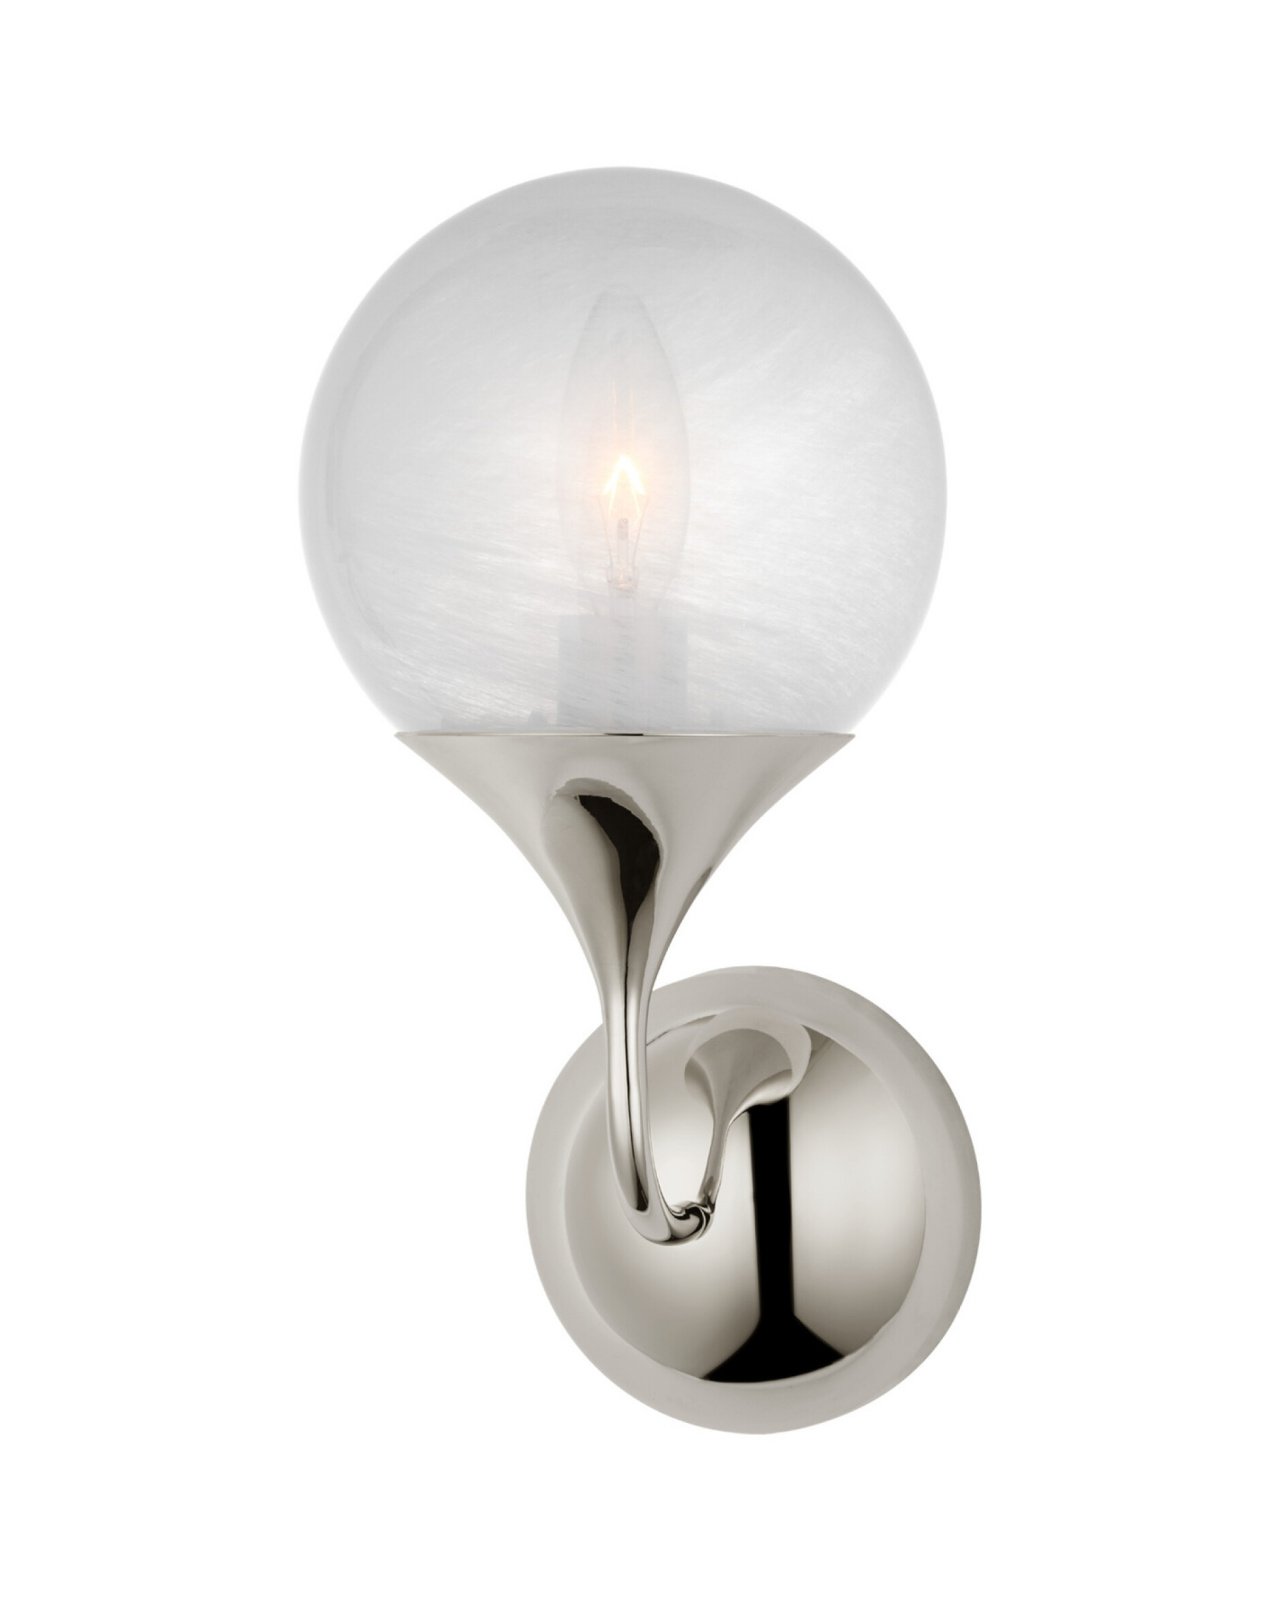 Cristol Small Single Sconce Polished Nickel